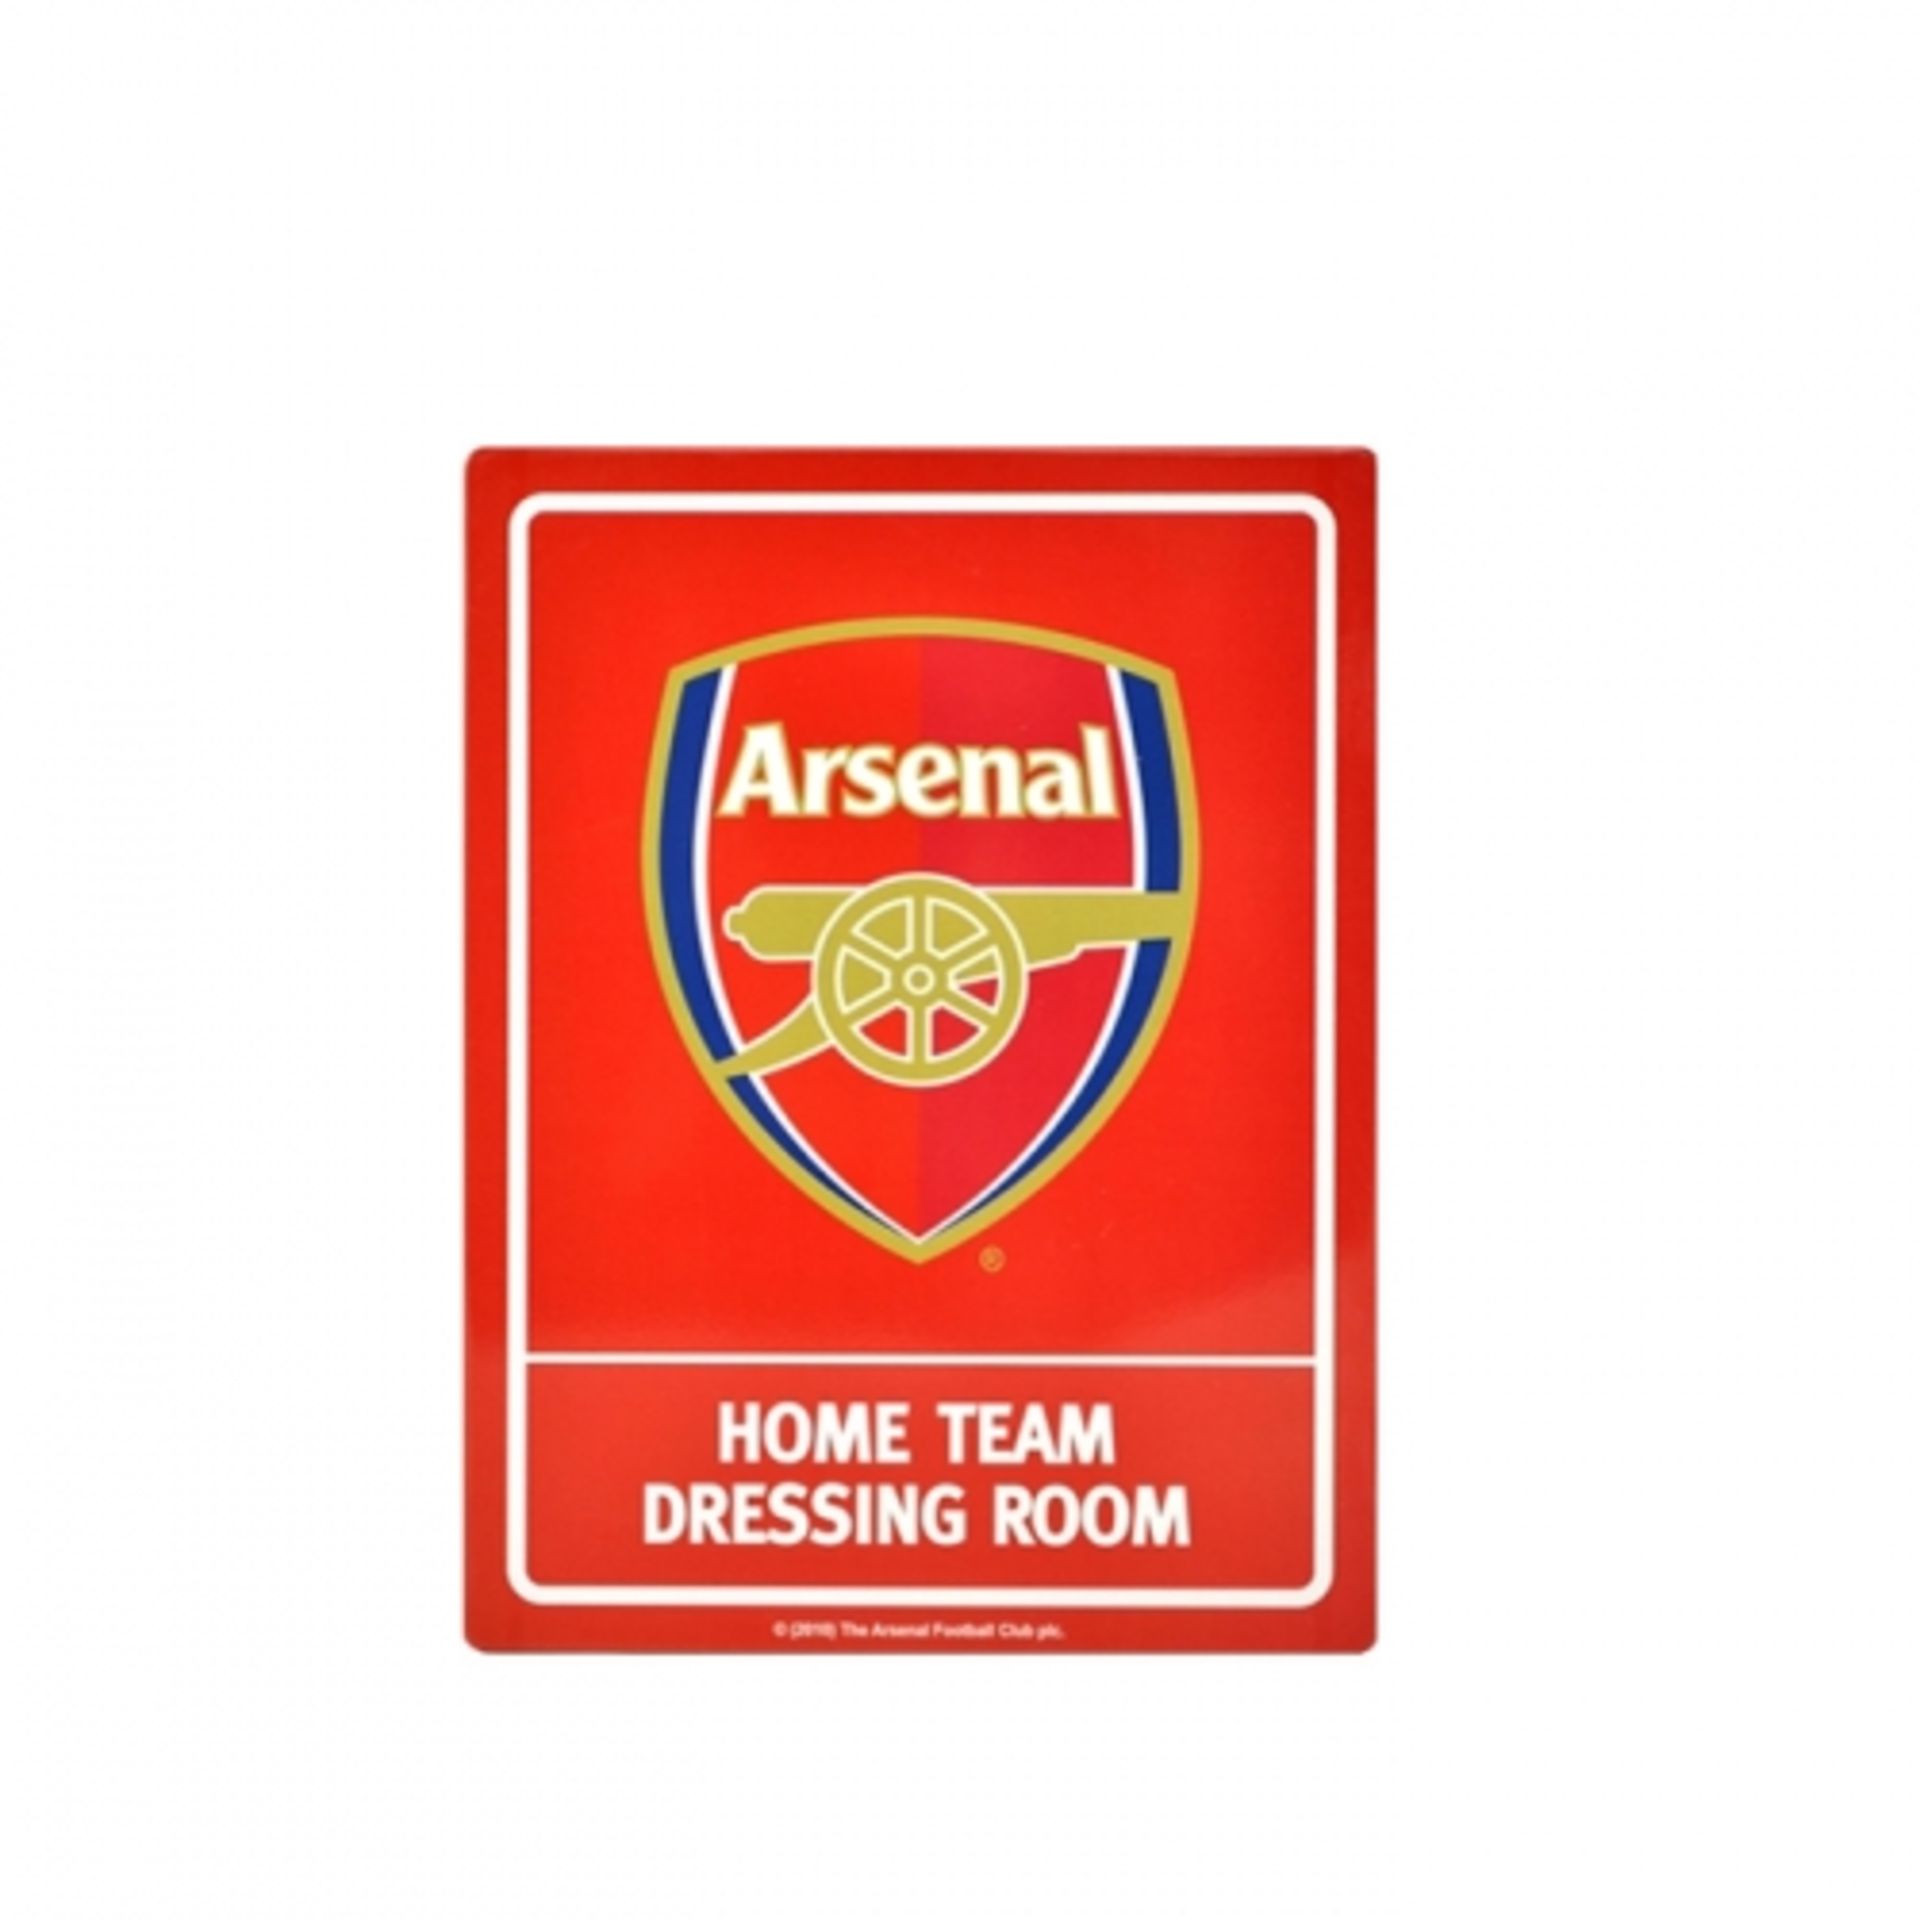 3X ARSENAL DRESSING ROOMS METAL SIGNS (SHIPPING BAND A)